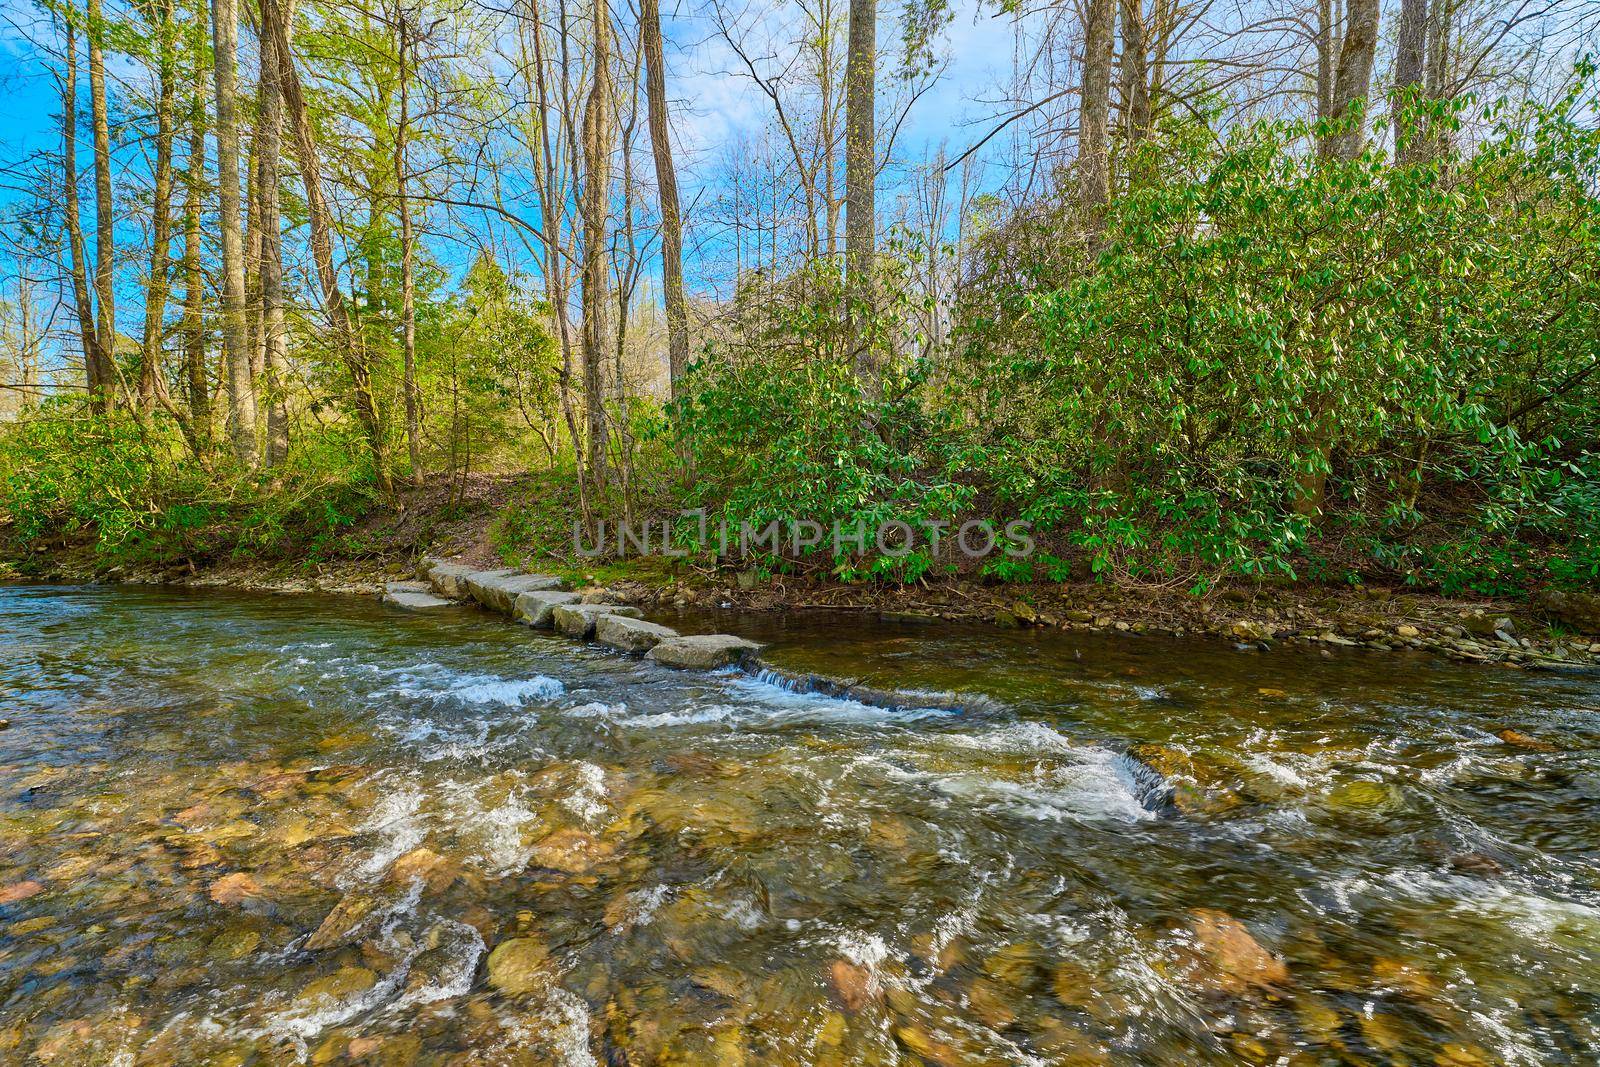 Mills River in Pisgah National Forest North Carolina.